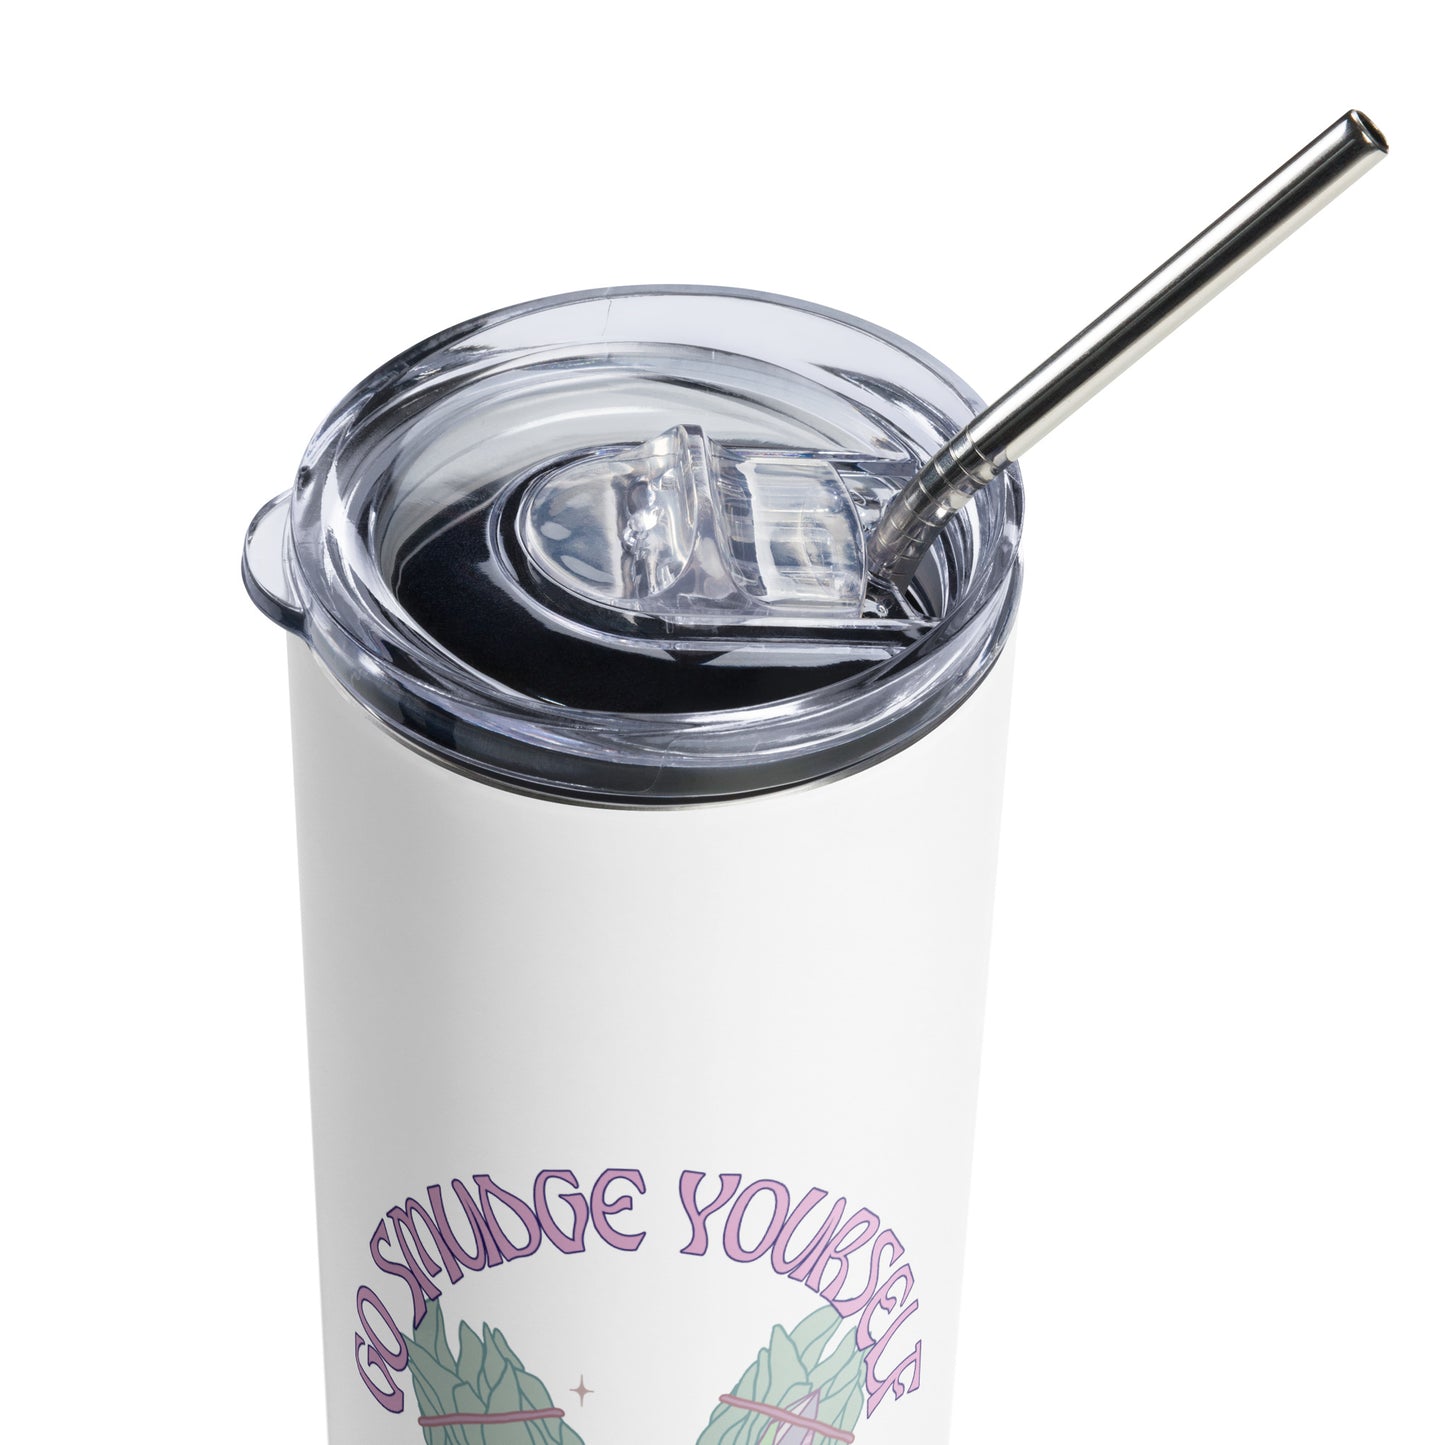 Go Smudge Yourself Stainless steel tumbler - Witchy Kitchens